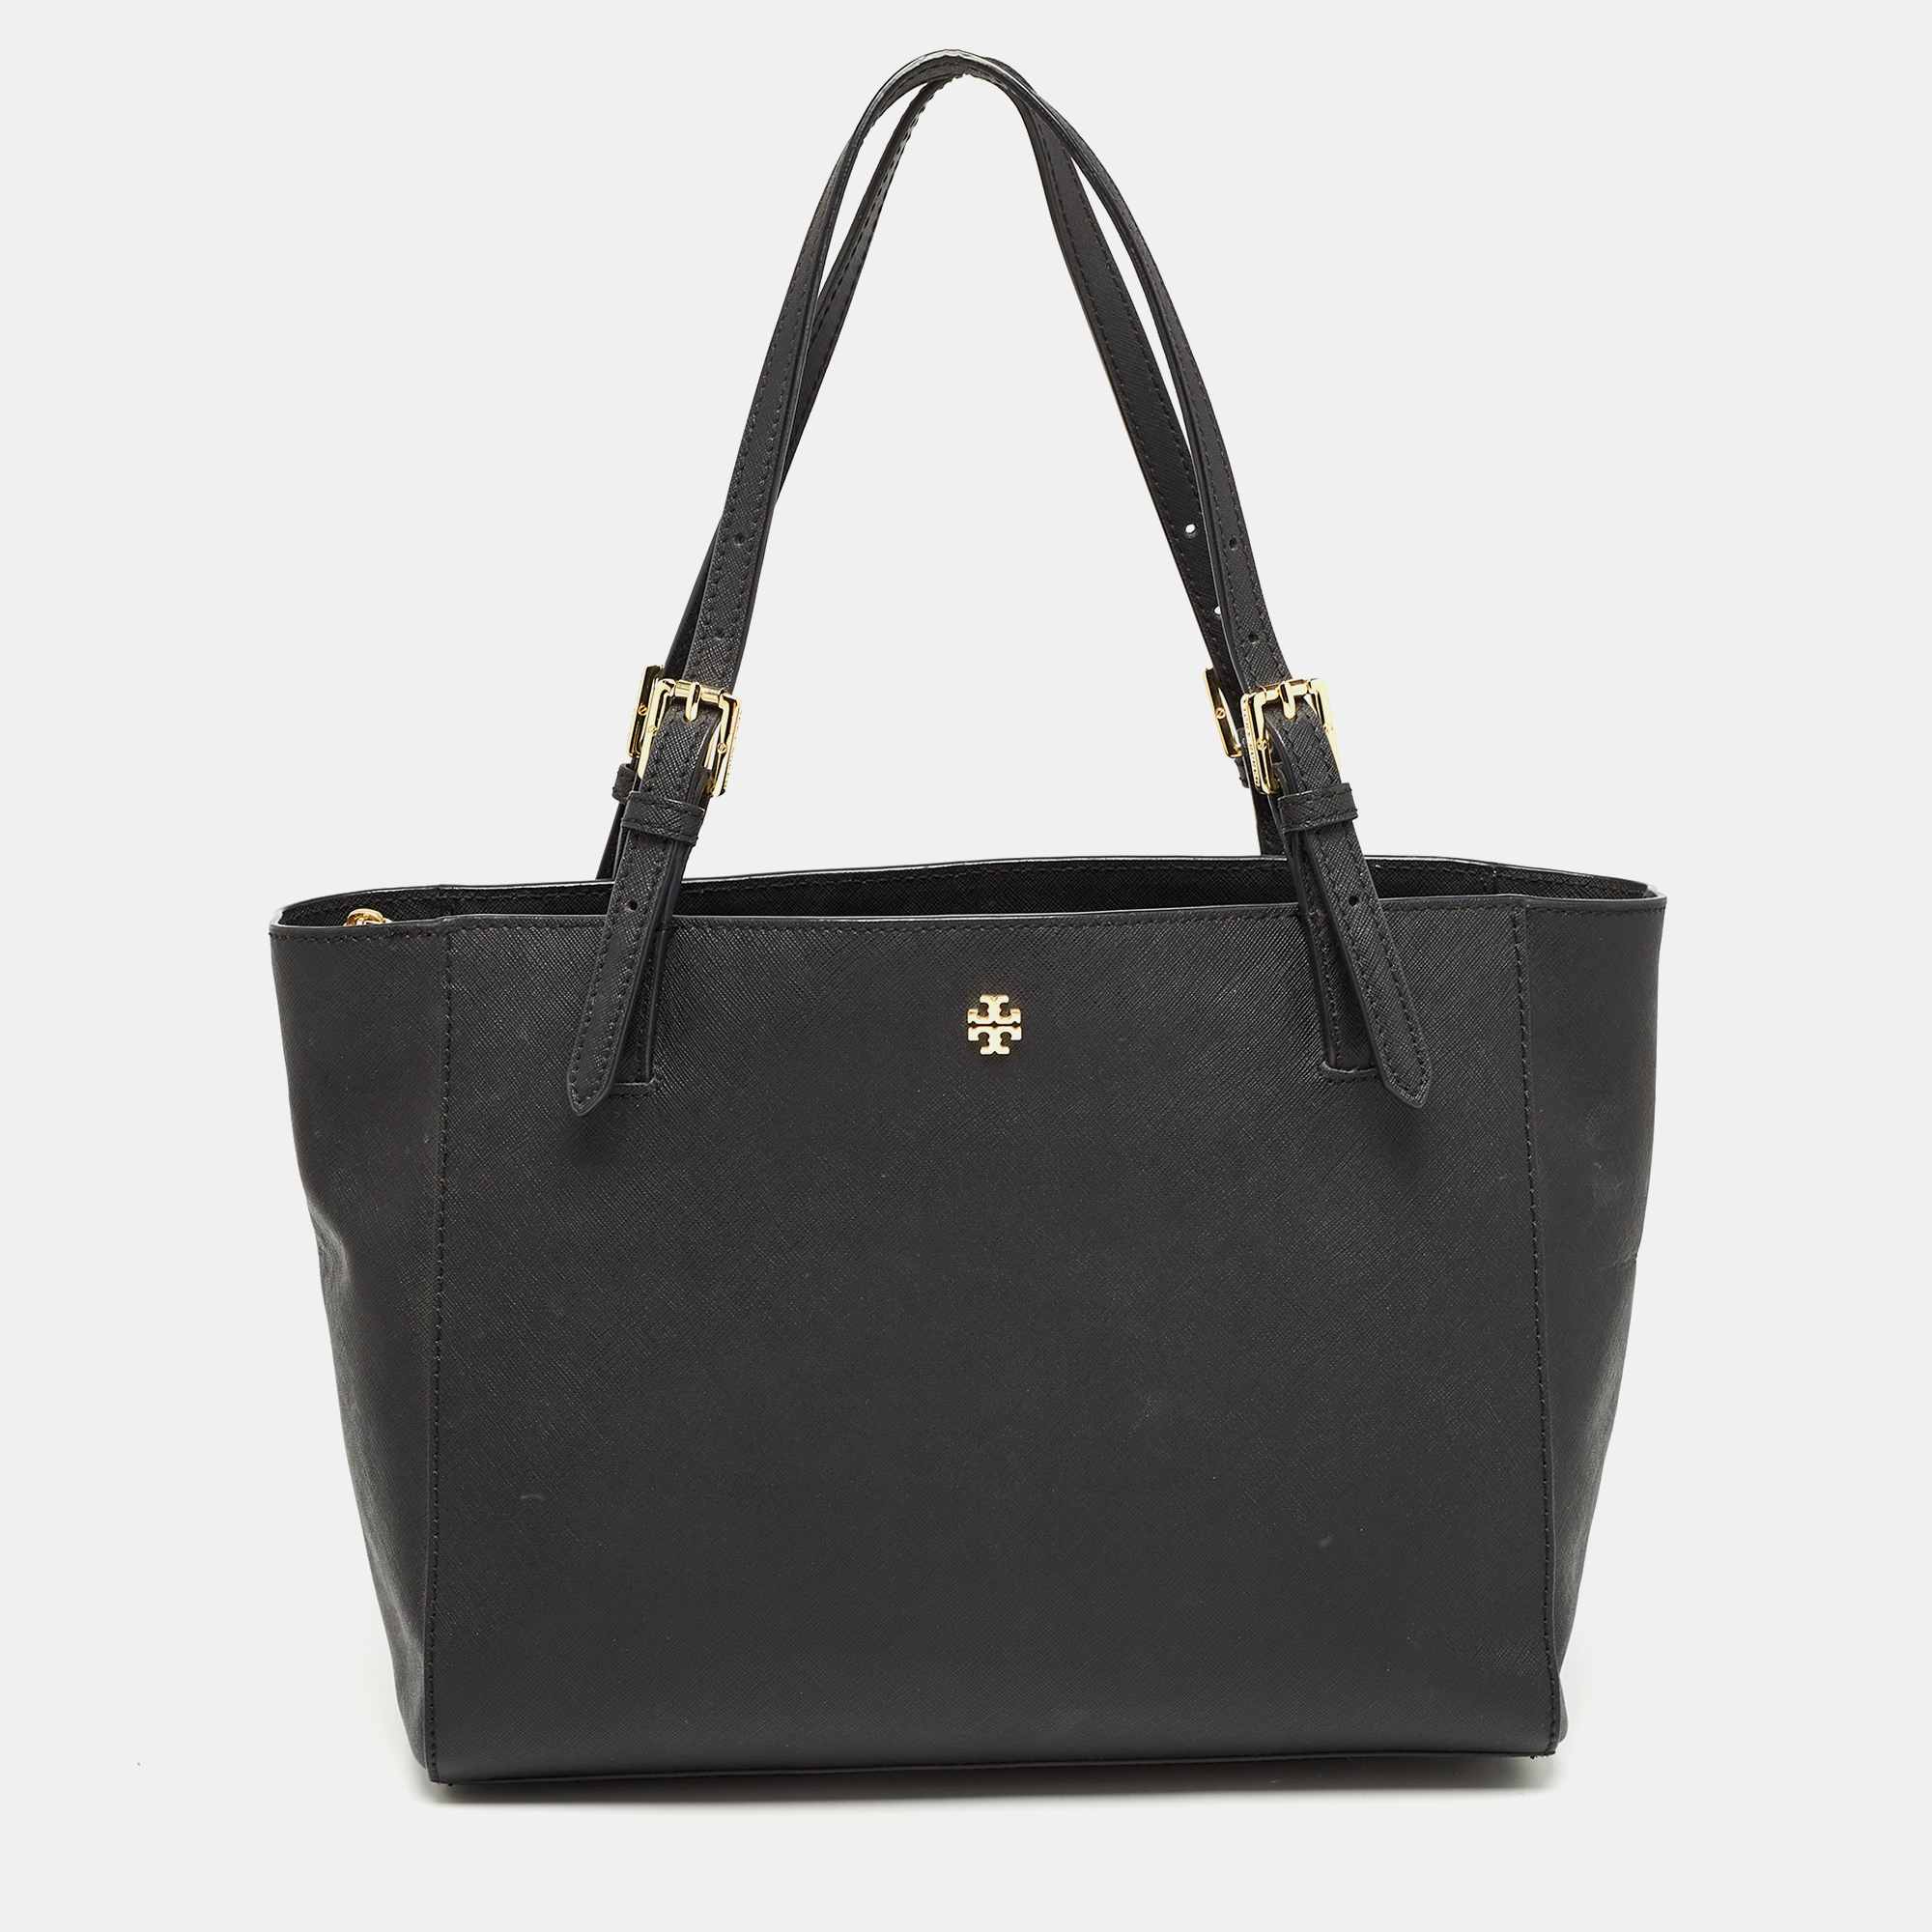 

Tory Burch Black Saffiano Leather York Buckle Tote